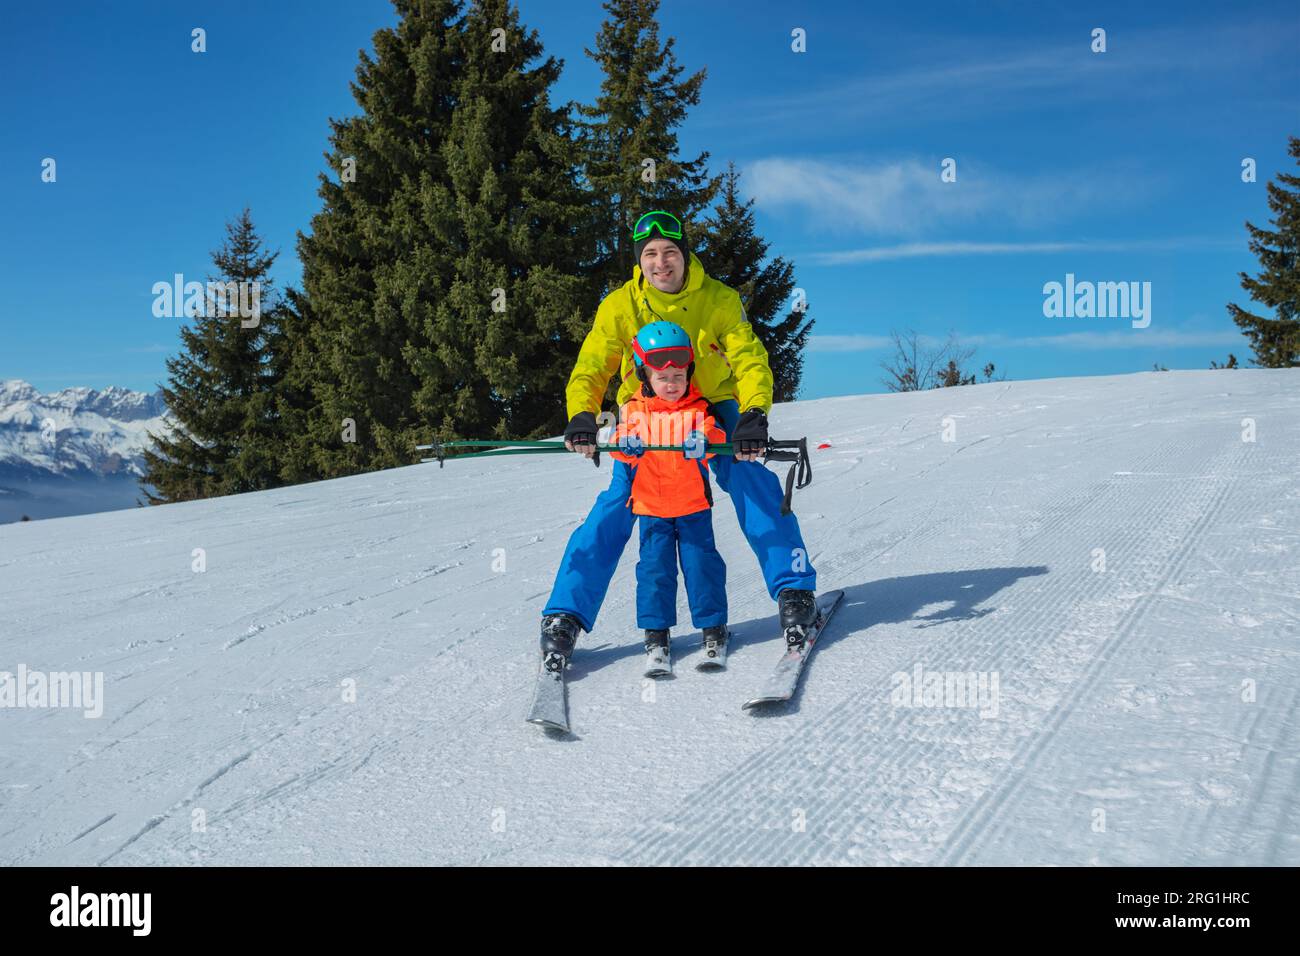 Instructor teaches kid gliding behind holding ski poles together Stock Photo